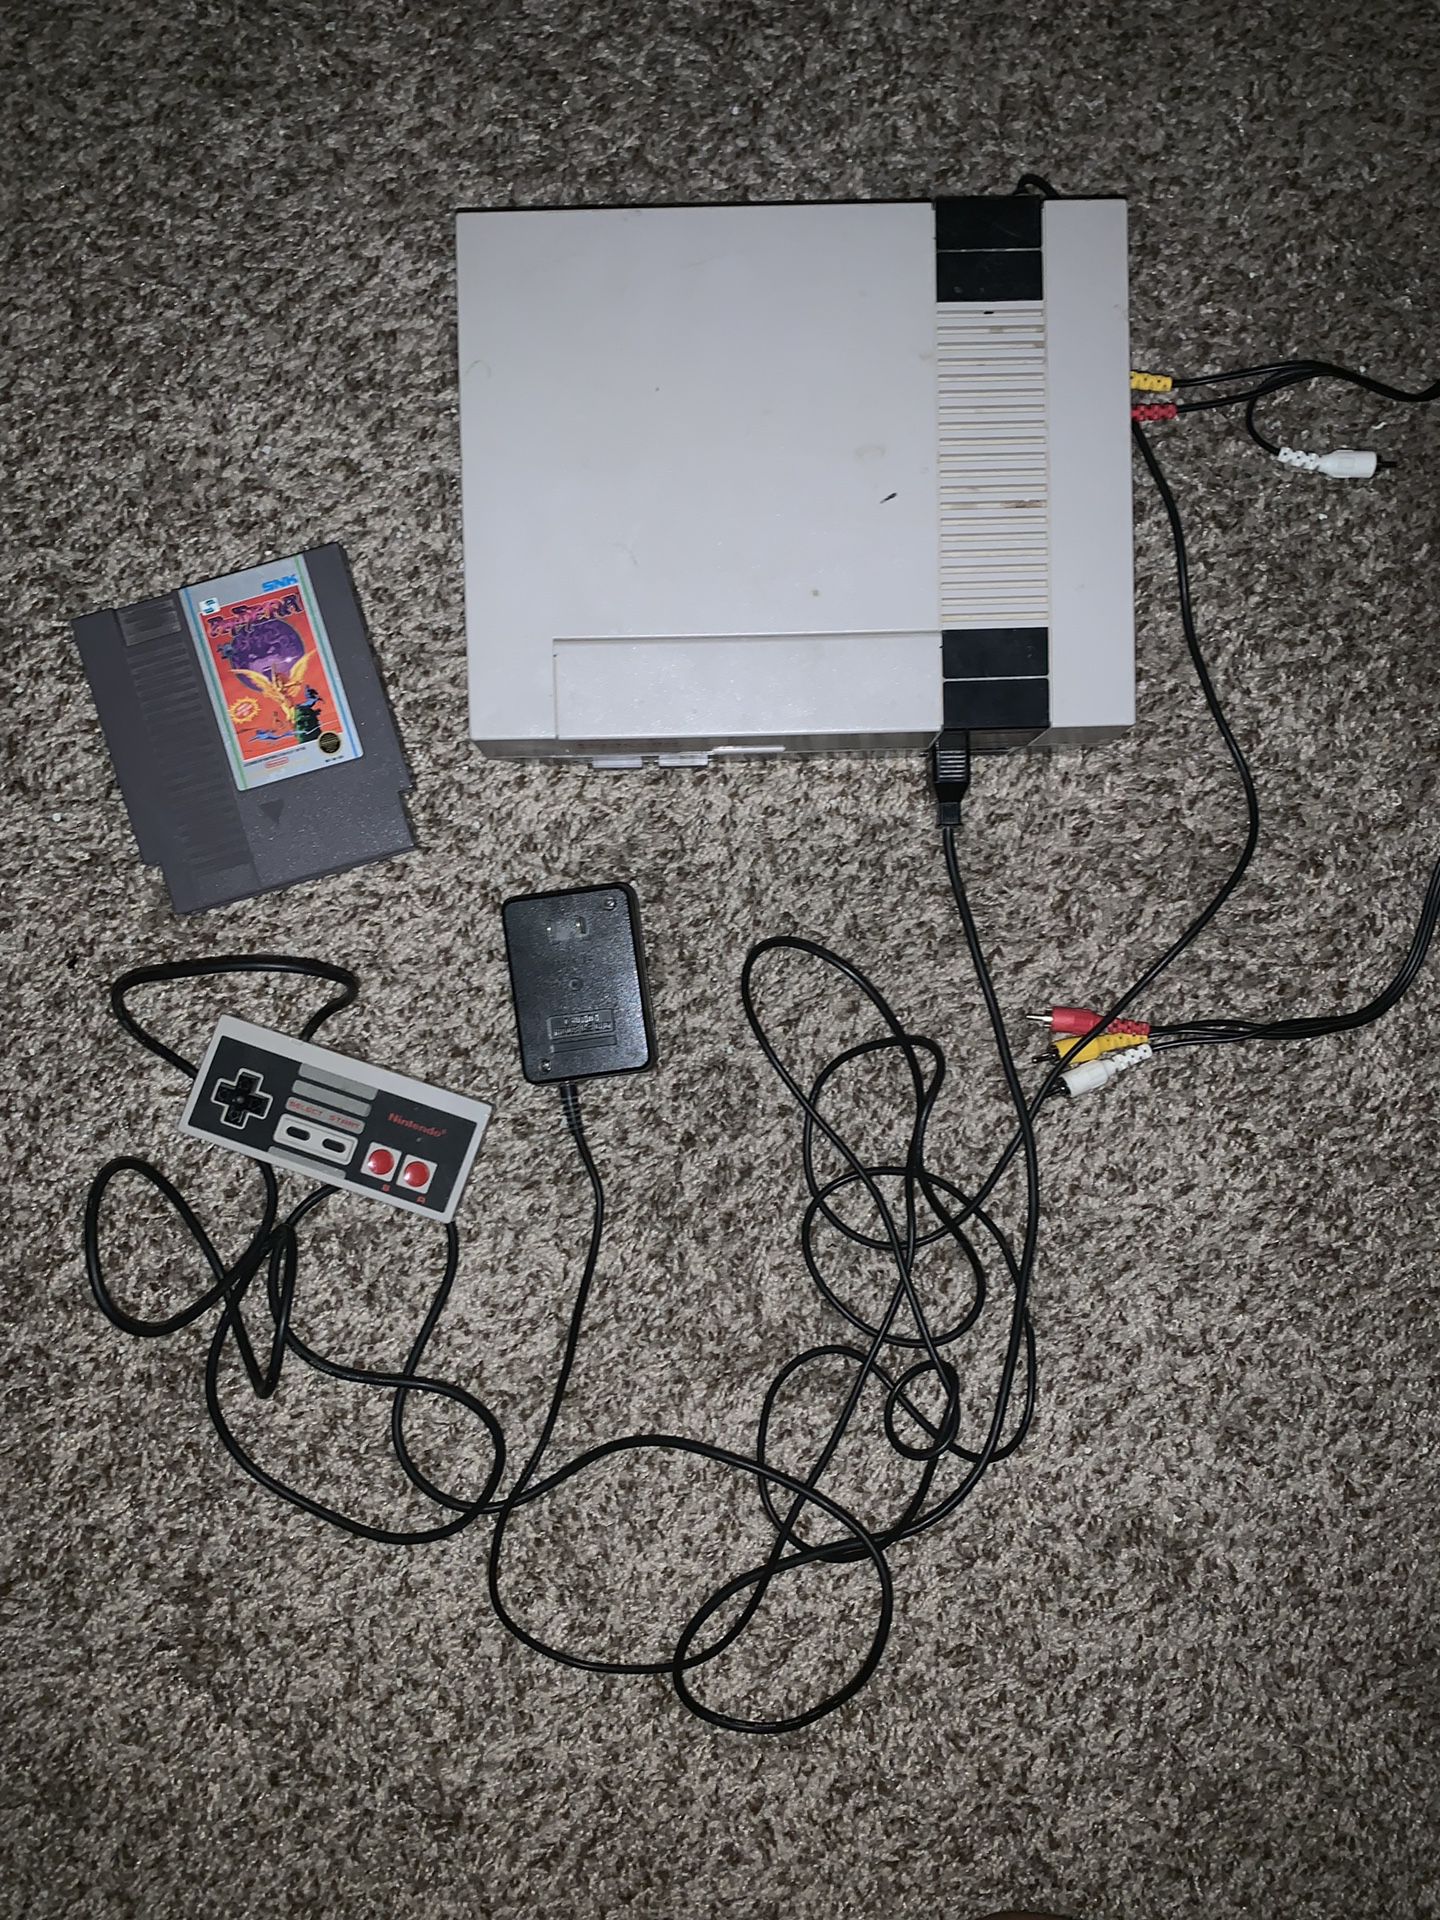 NINTENDO ENTERTAINMENT SYSTEM NES CONSOLE WITH ALL CORDS, REMOTE CONTROLLER & VIDEO GAME